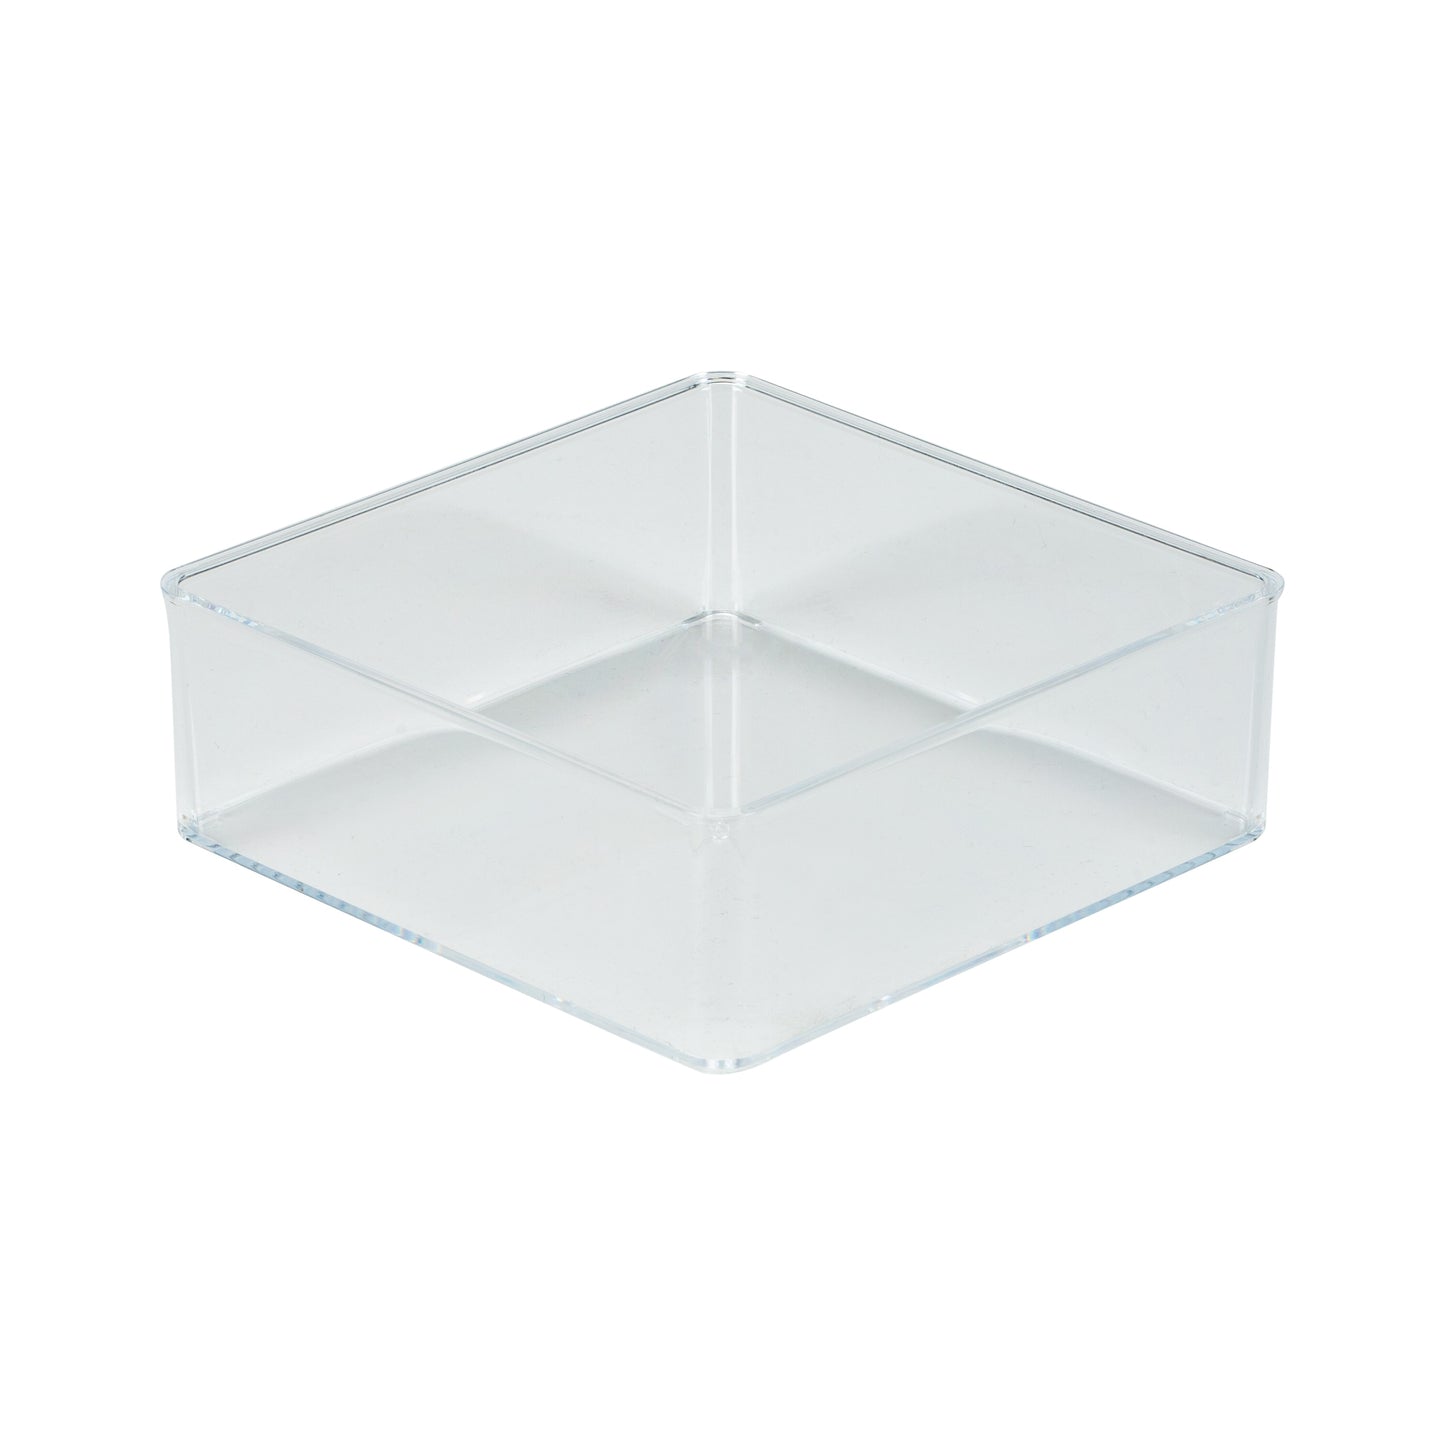 Large Square Drawer Organizer - 6"x6"x2" - Clear